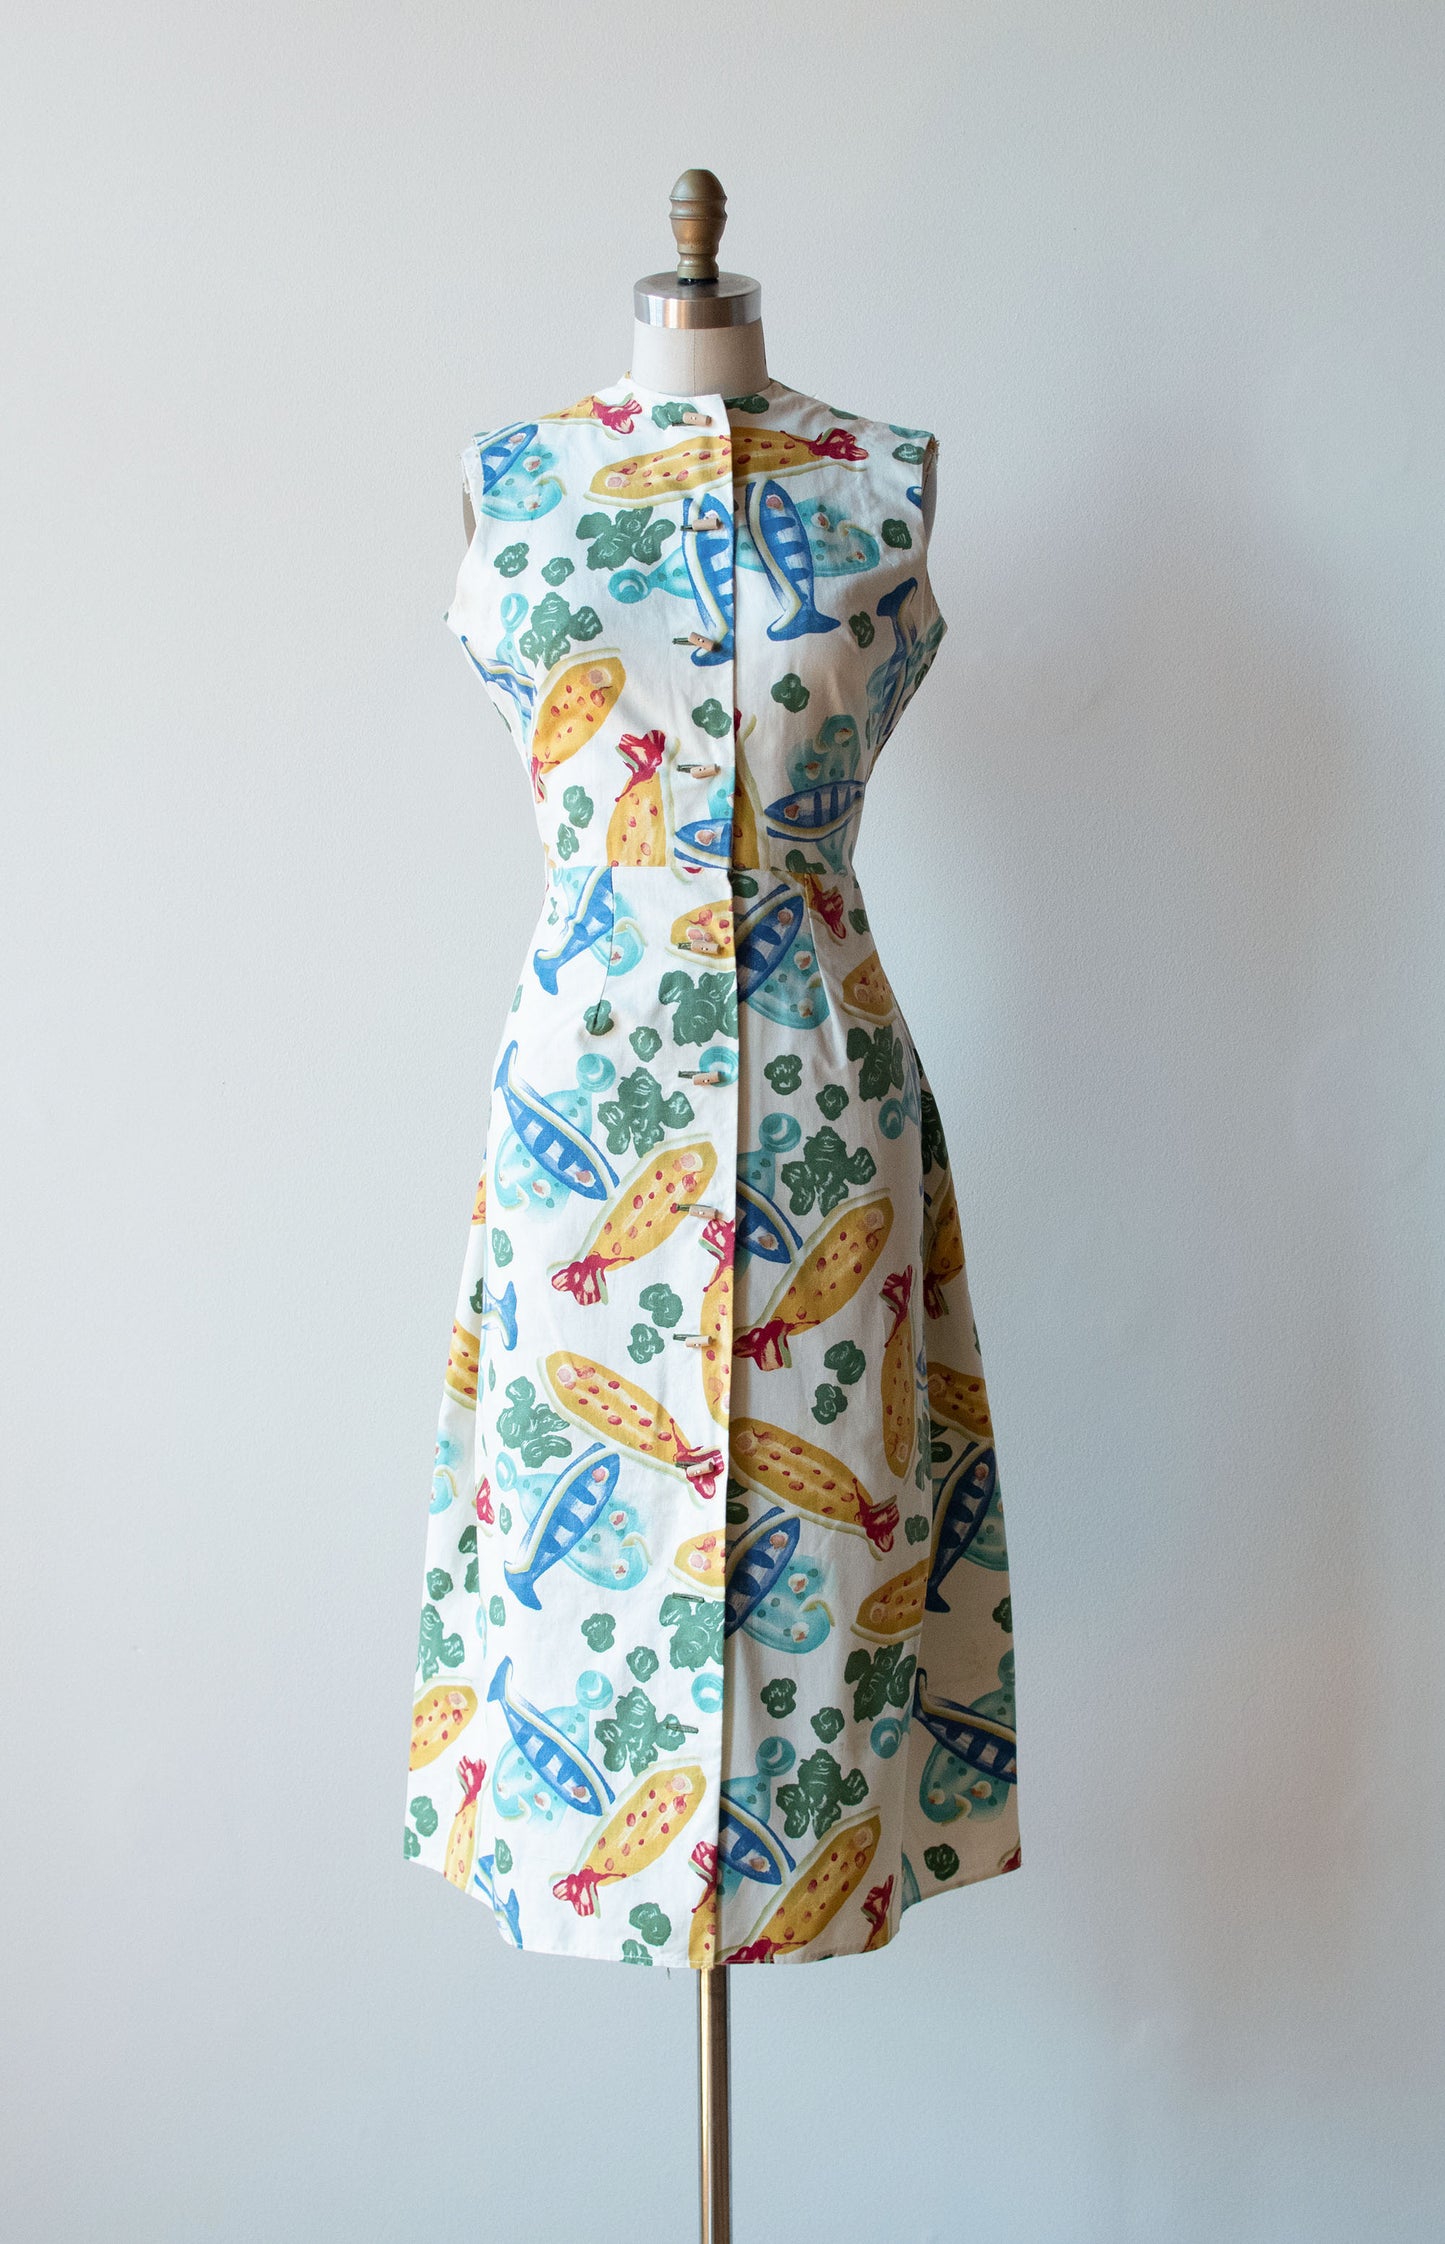 Modern Master's Picasso "Fish" Print Dress | Claire McCardell 1955